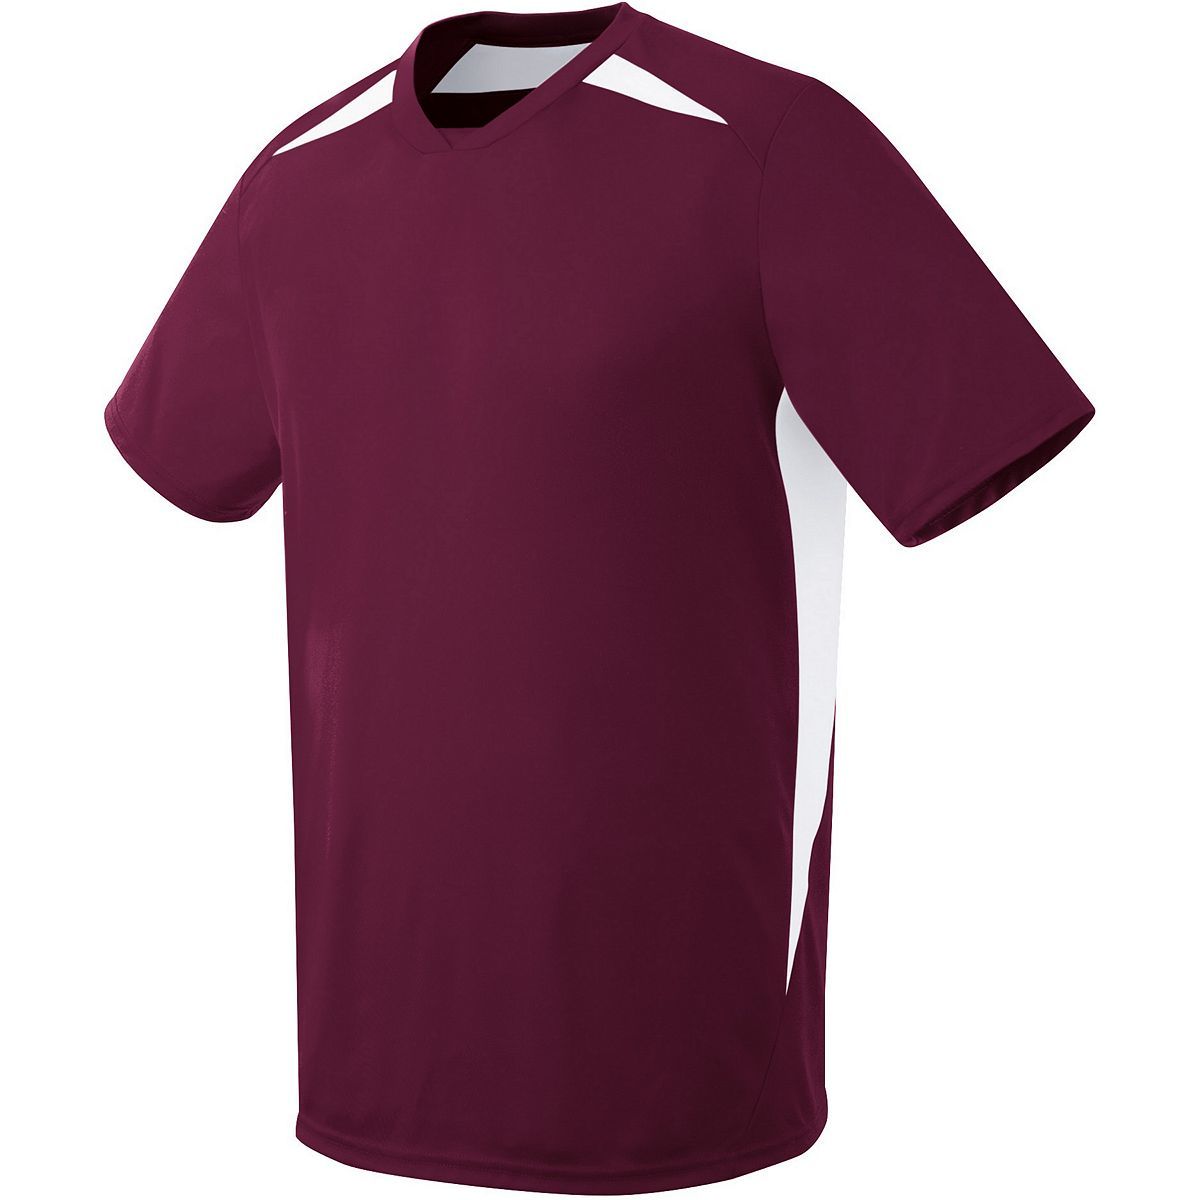 High 5 Youth Hawk Jersey in Maroon/White  -Part of the Youth, Youth-Jersey, High5-Products, Soccer, Shirts, All-Sports-1 product lines at KanaleyCreations.com